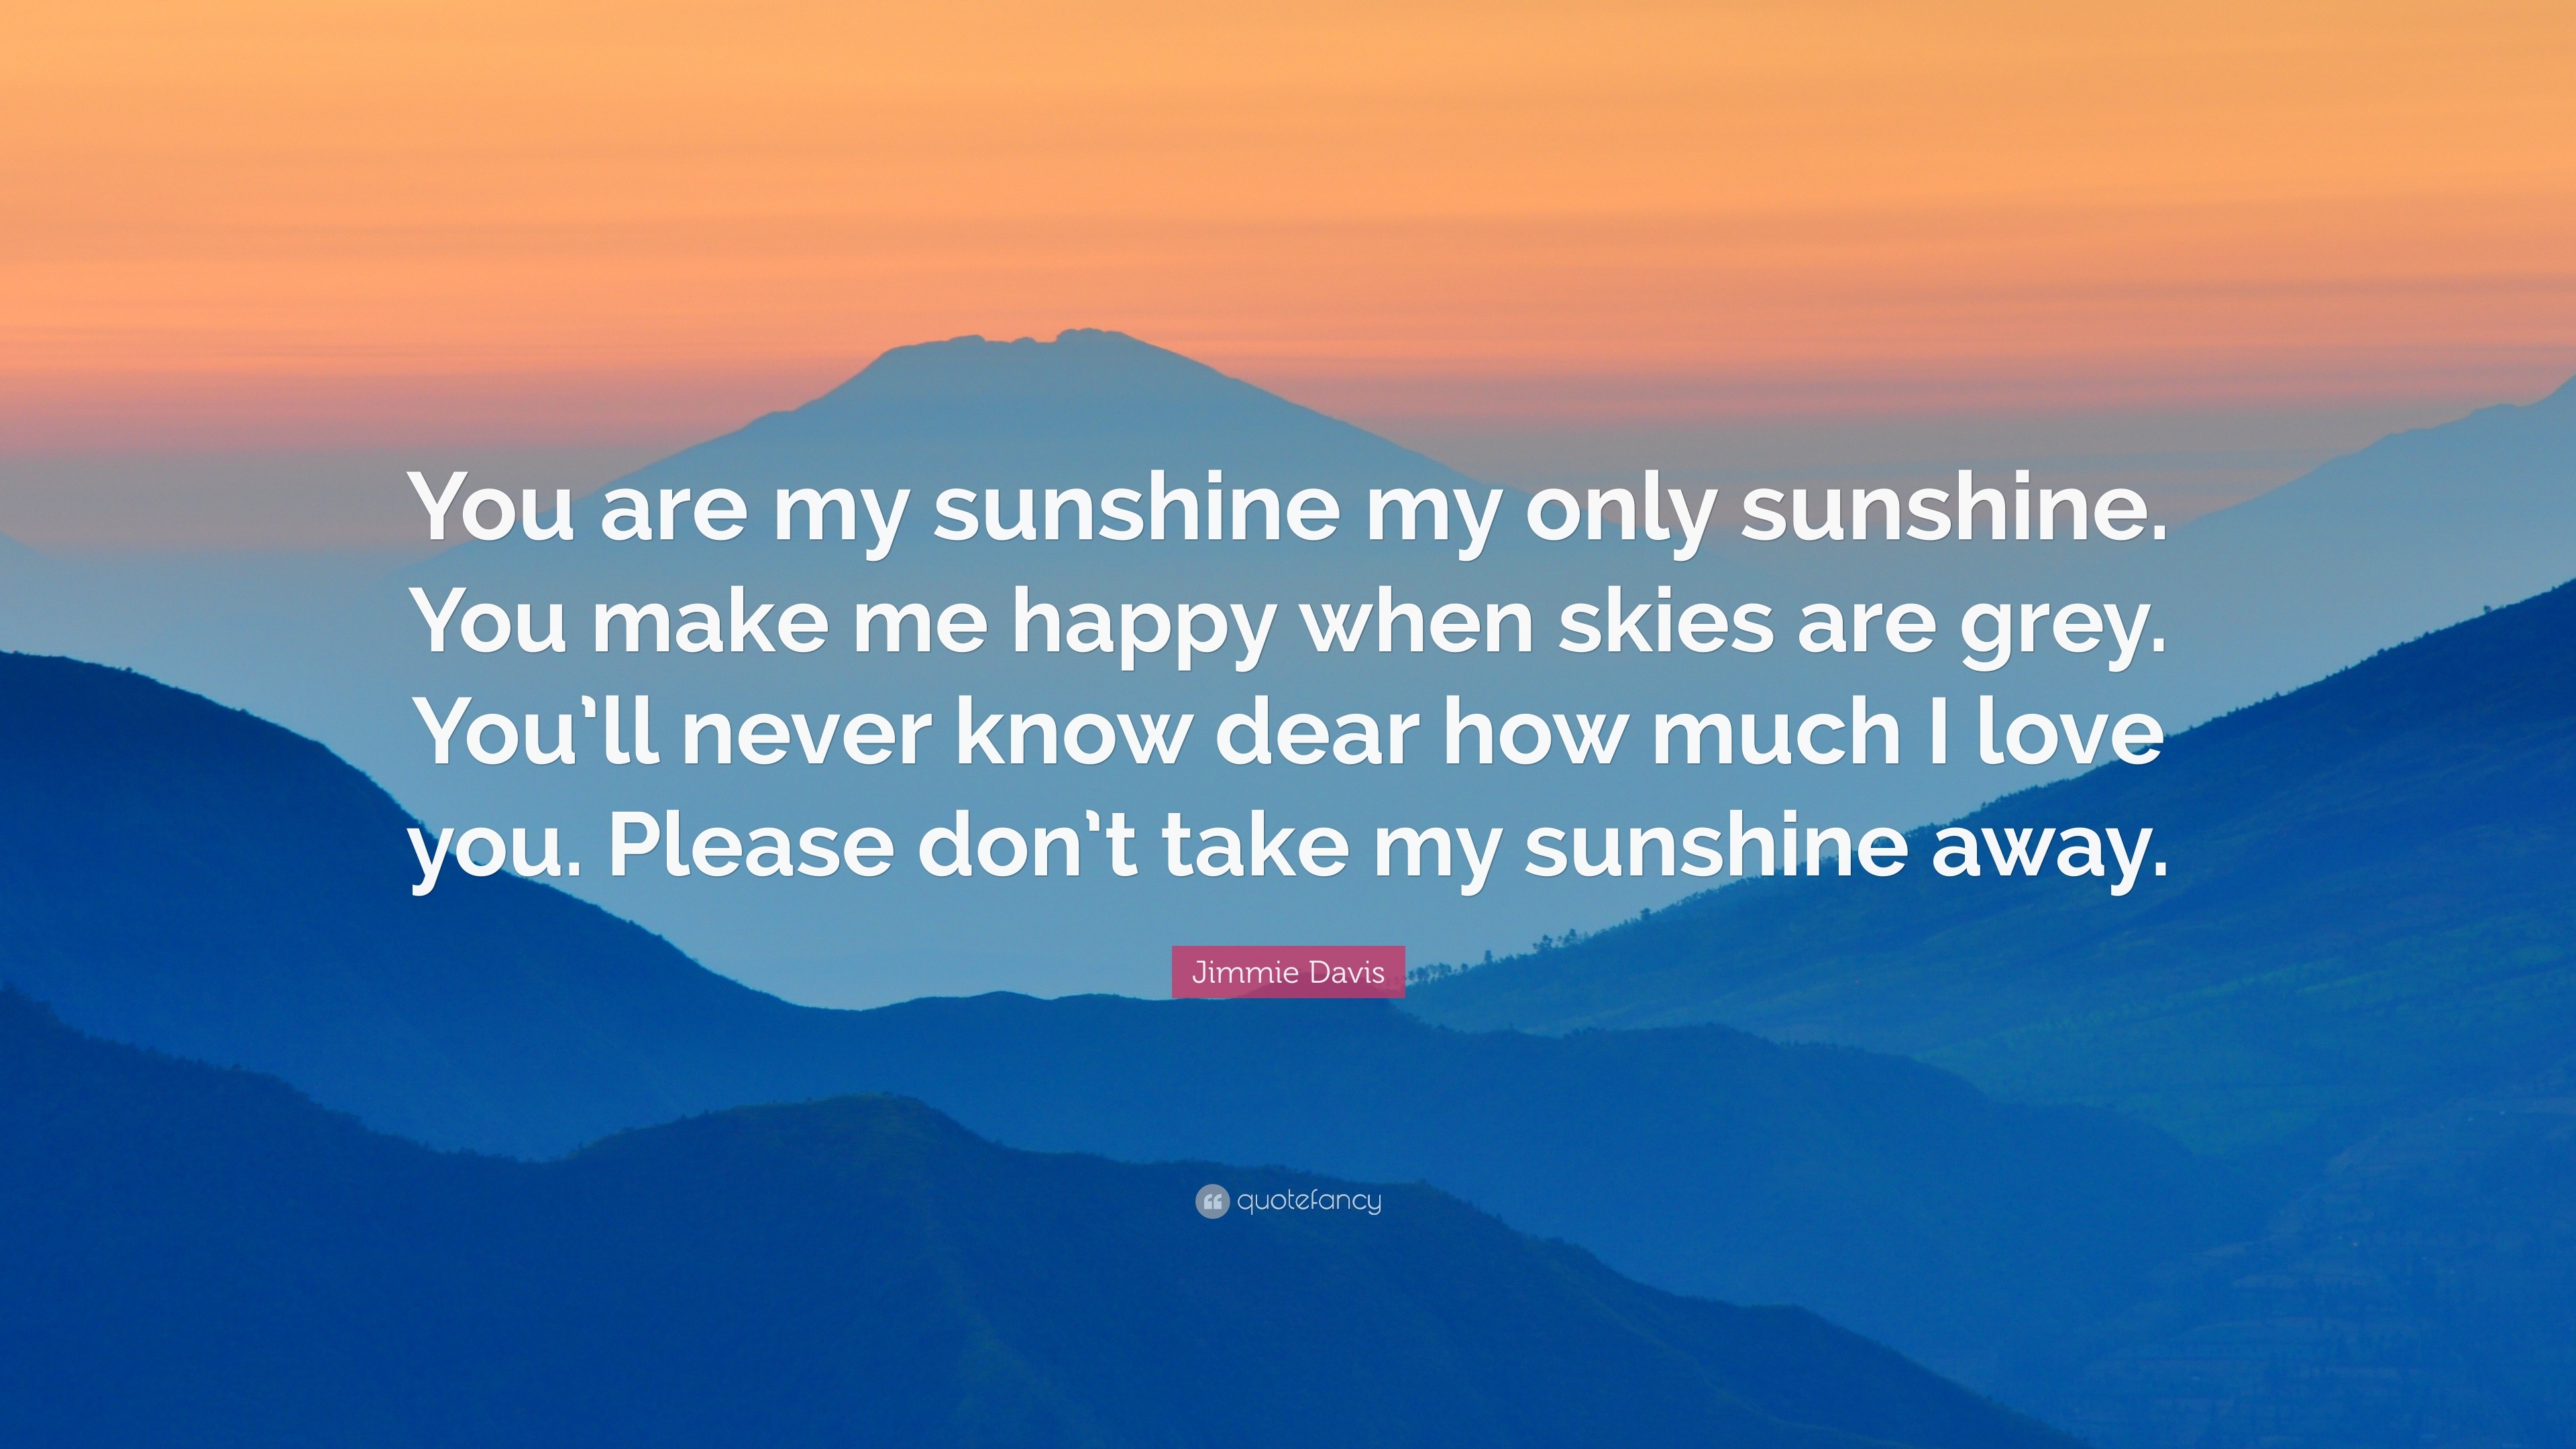 Jimmie Davis Quote “You are my sunshine my only sunshine You make me